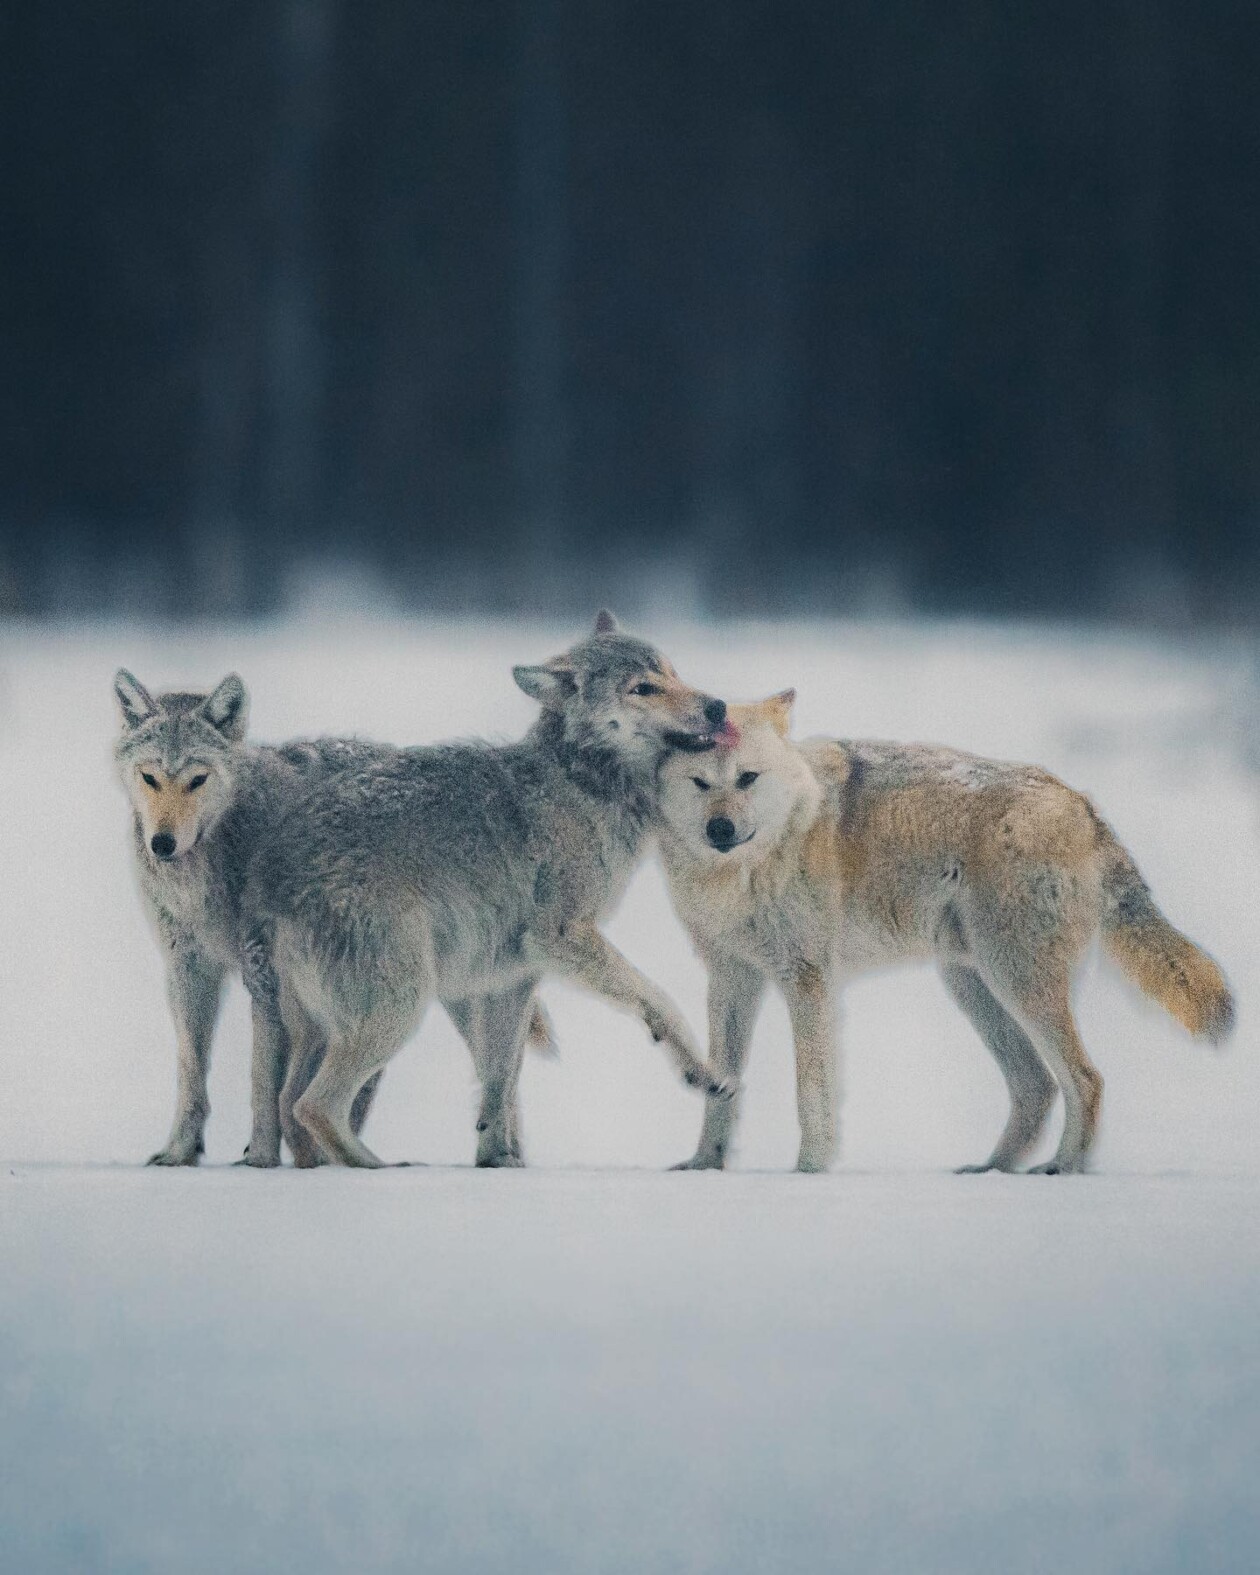 Captivating Pictures Of Arctic Animals By Konsta Punkka (3)